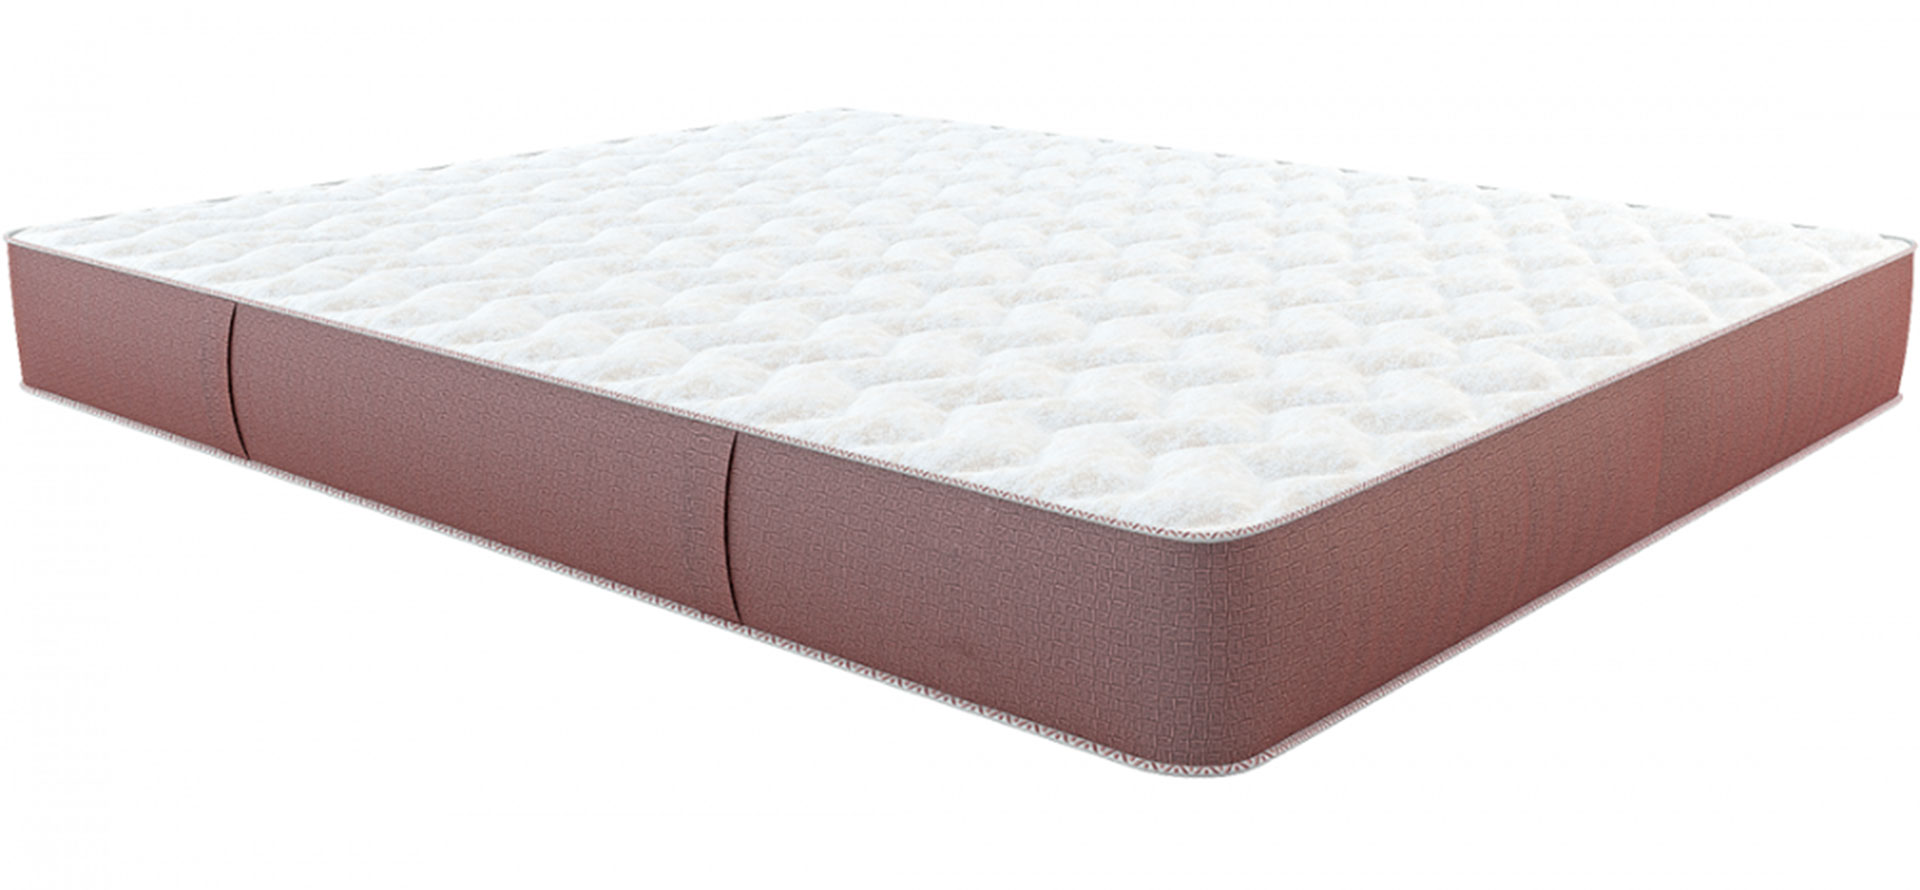 Best type of mattress for herniated disc.